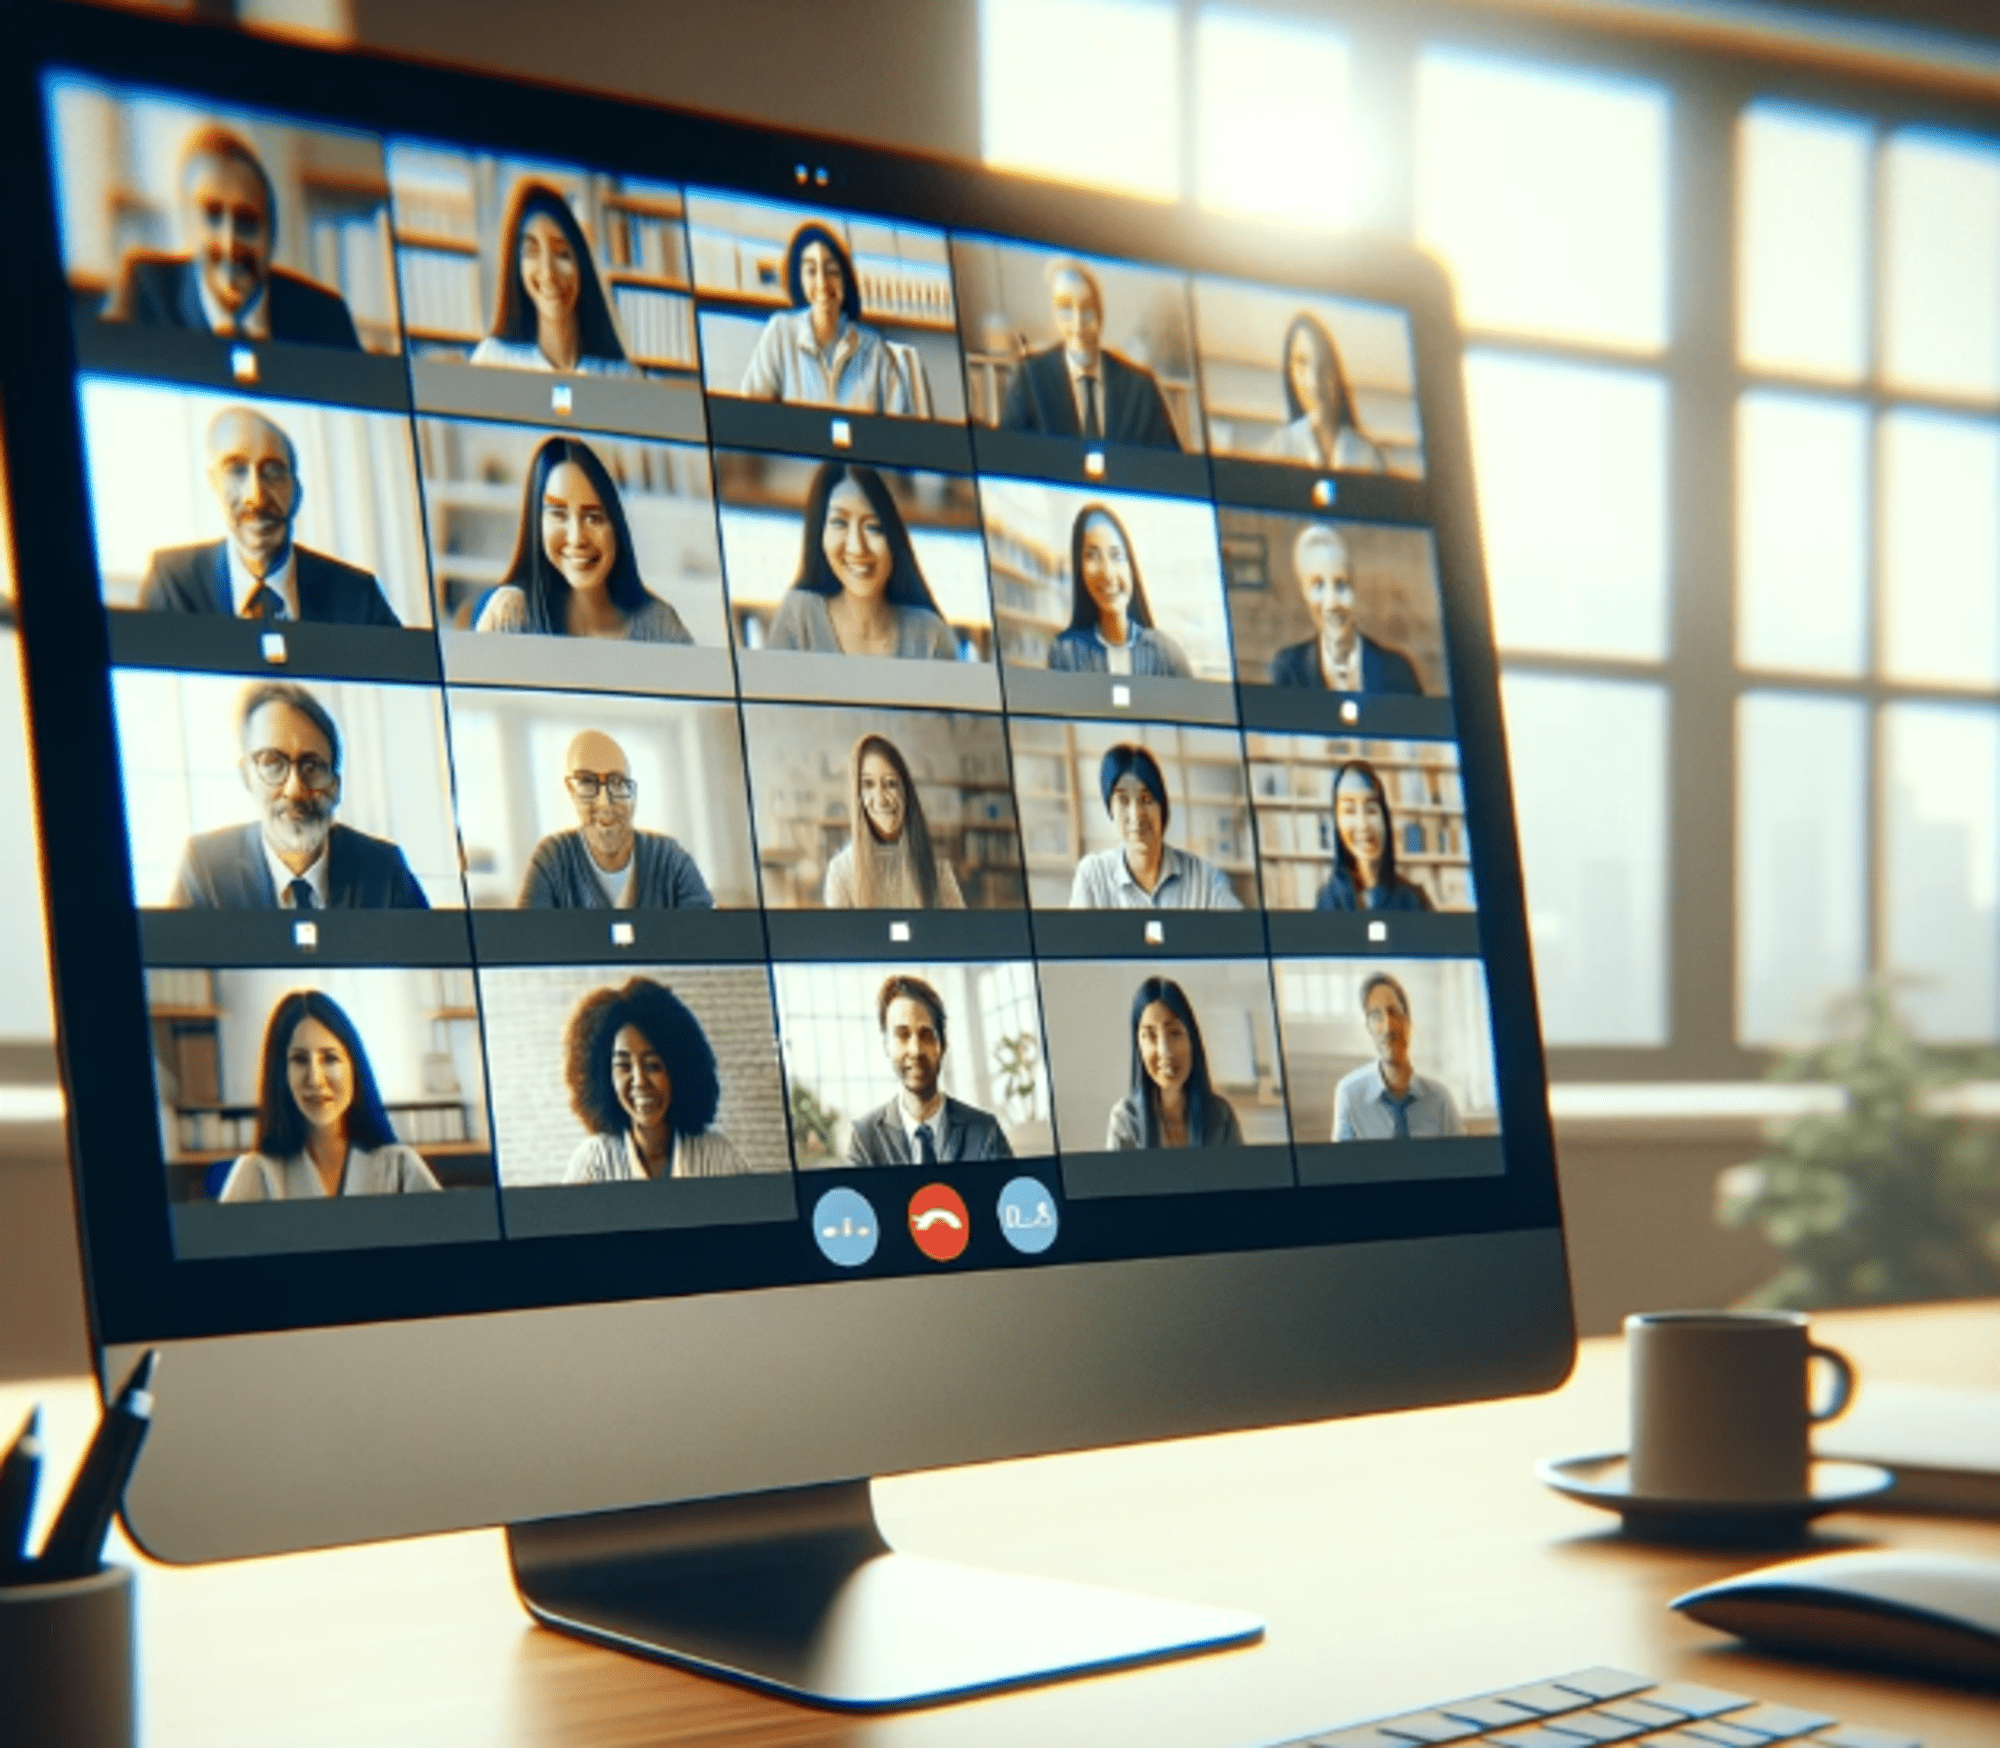 A computer screen sits on a table in front of a window. On the computer screen, diverse faces are visible in an online video conferencing call.